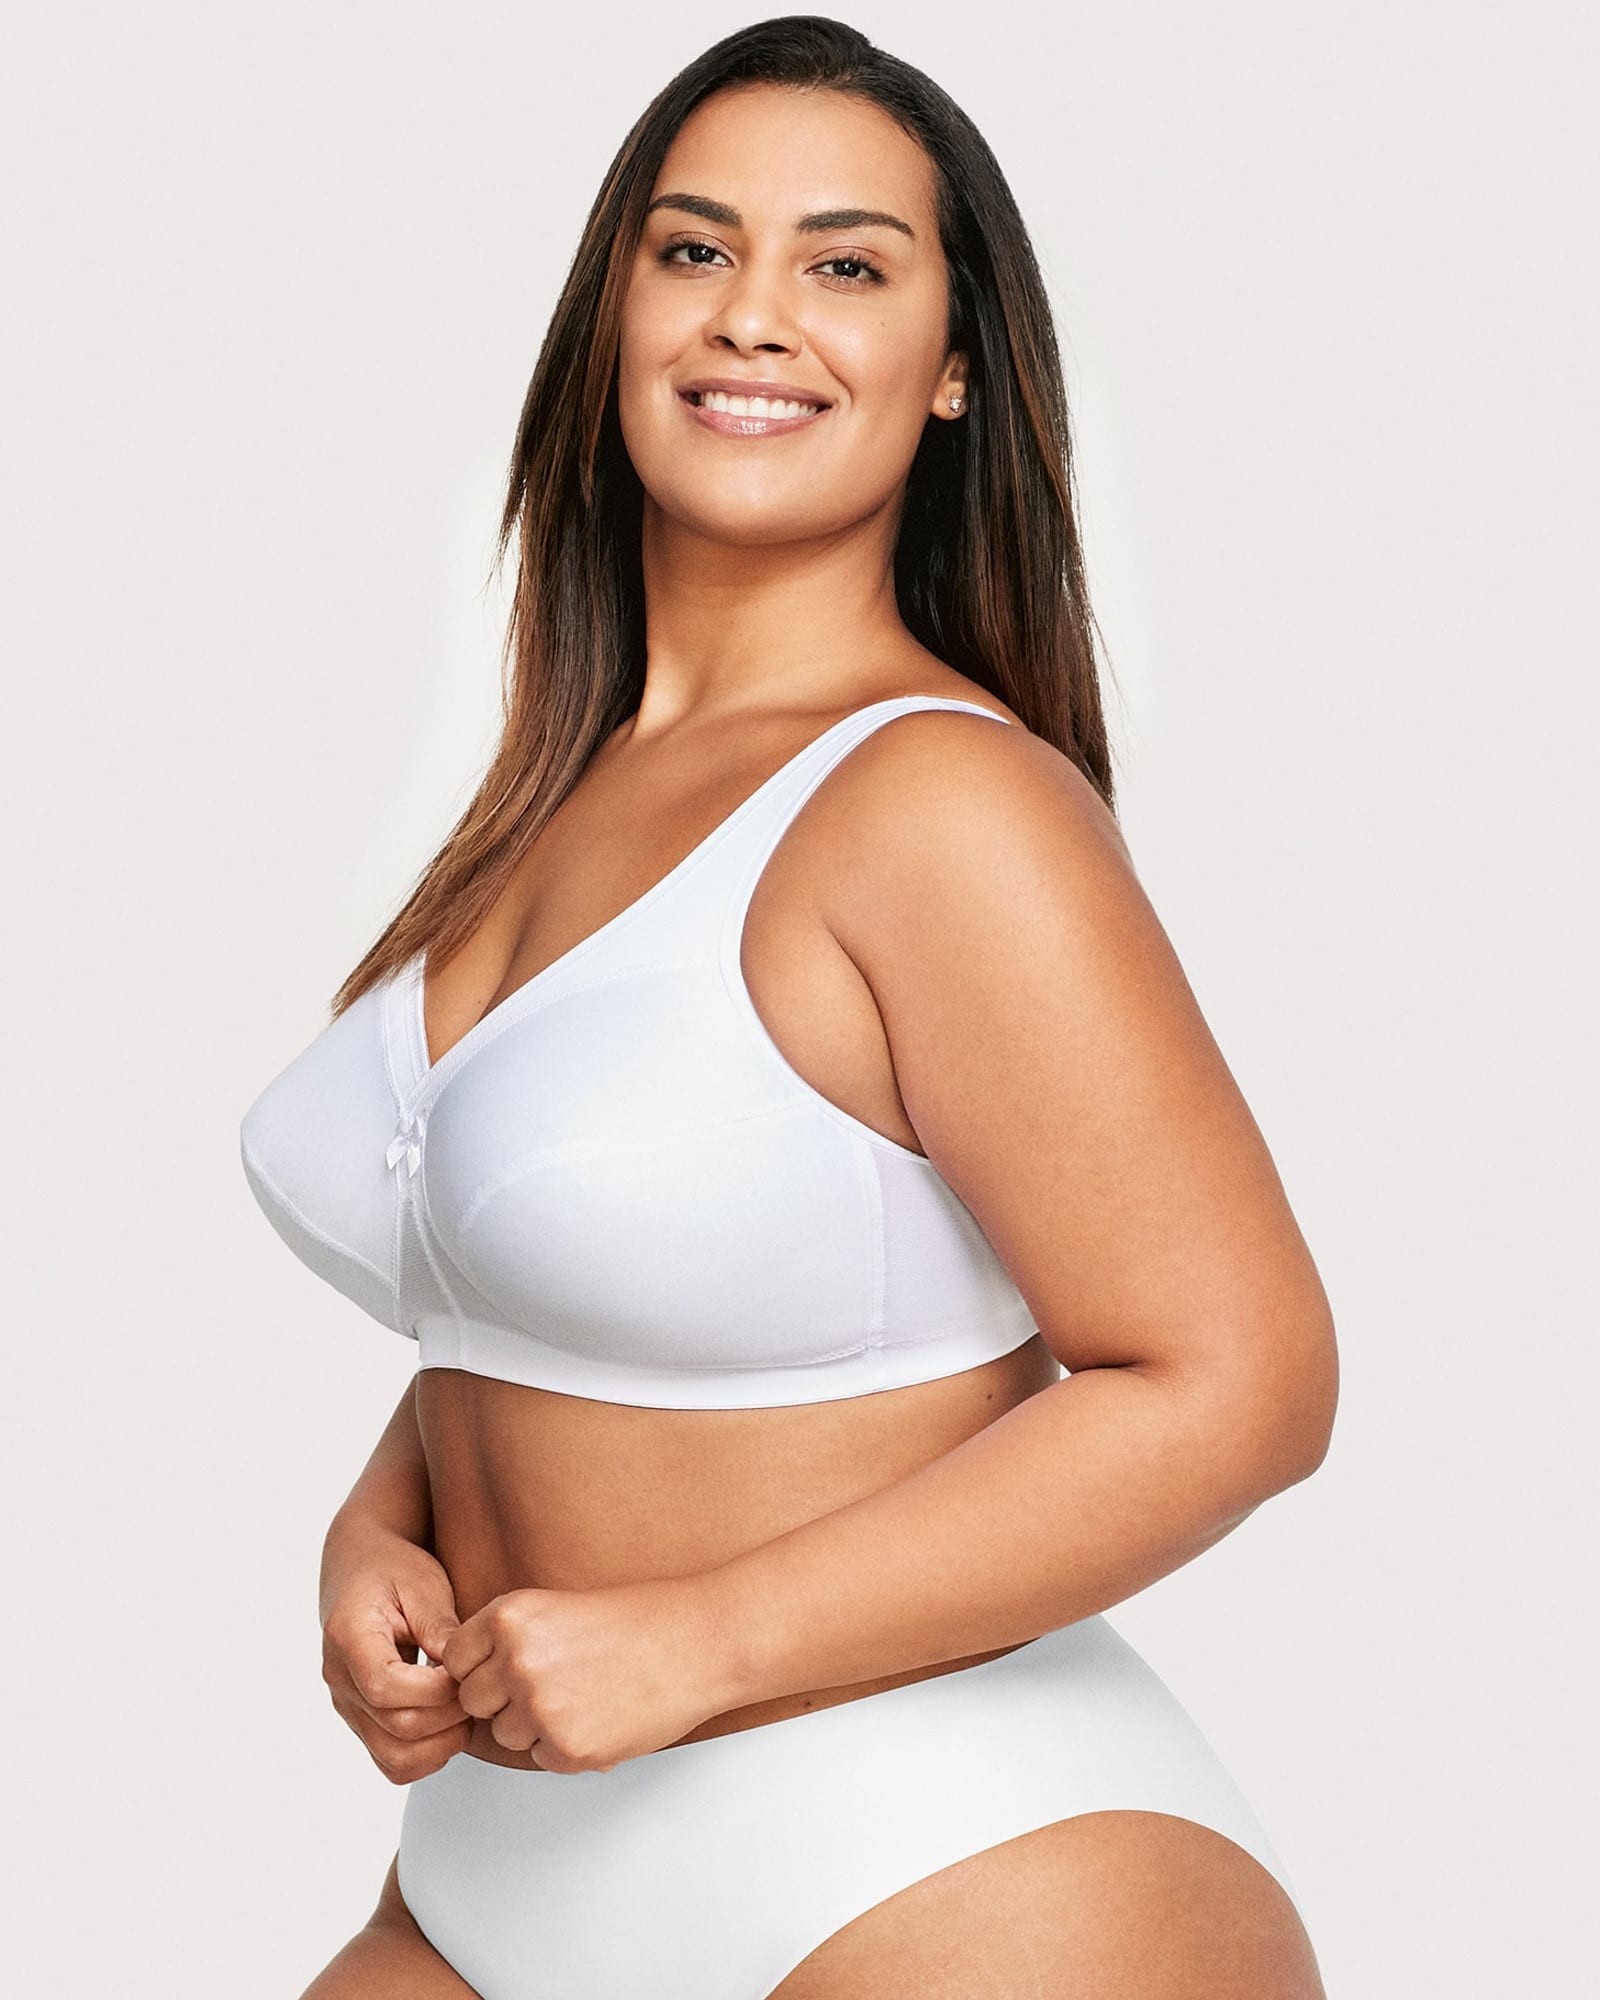 adidas 11 Honoré High-Support Bra (Plus Size) - Pink